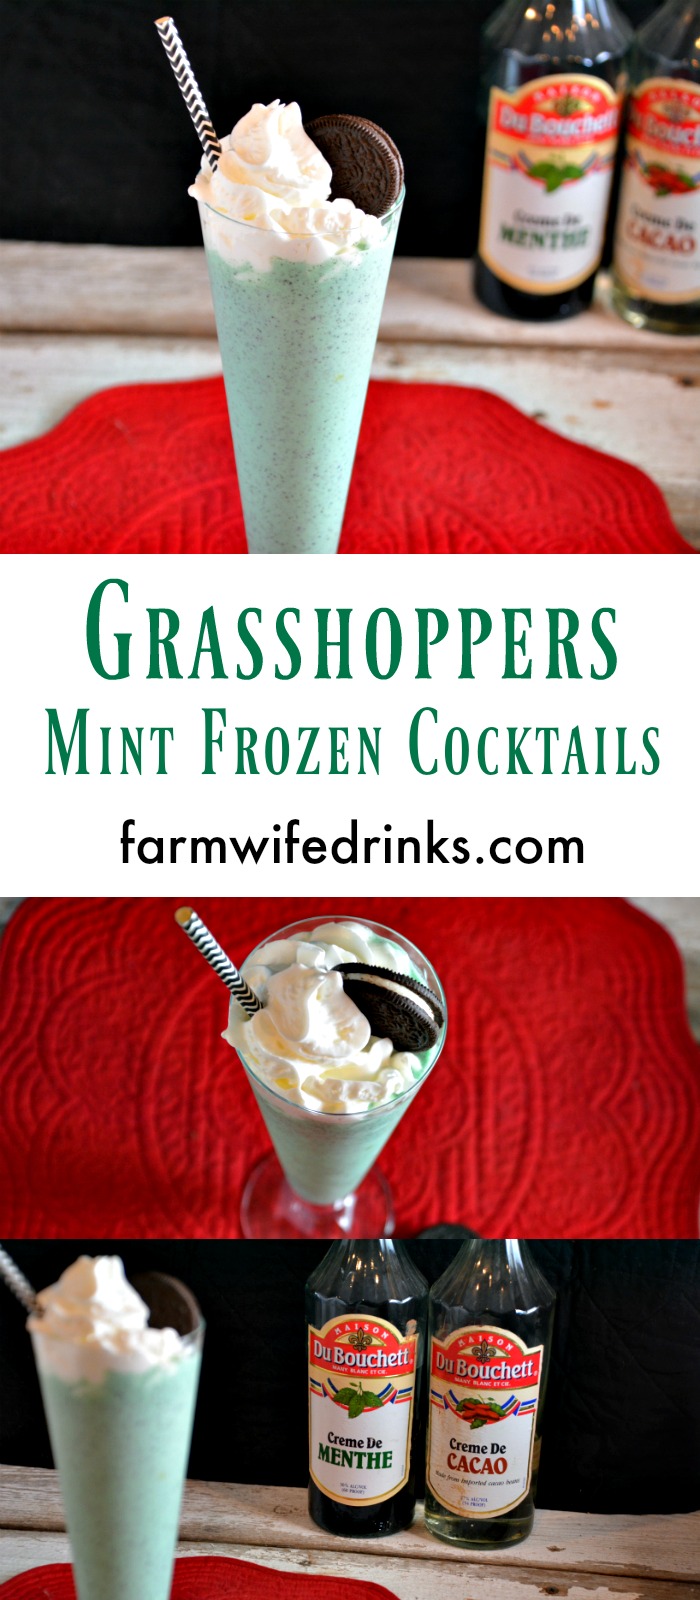 Grasshoppers Frozen Mint Chocolate Cocktail Drinks